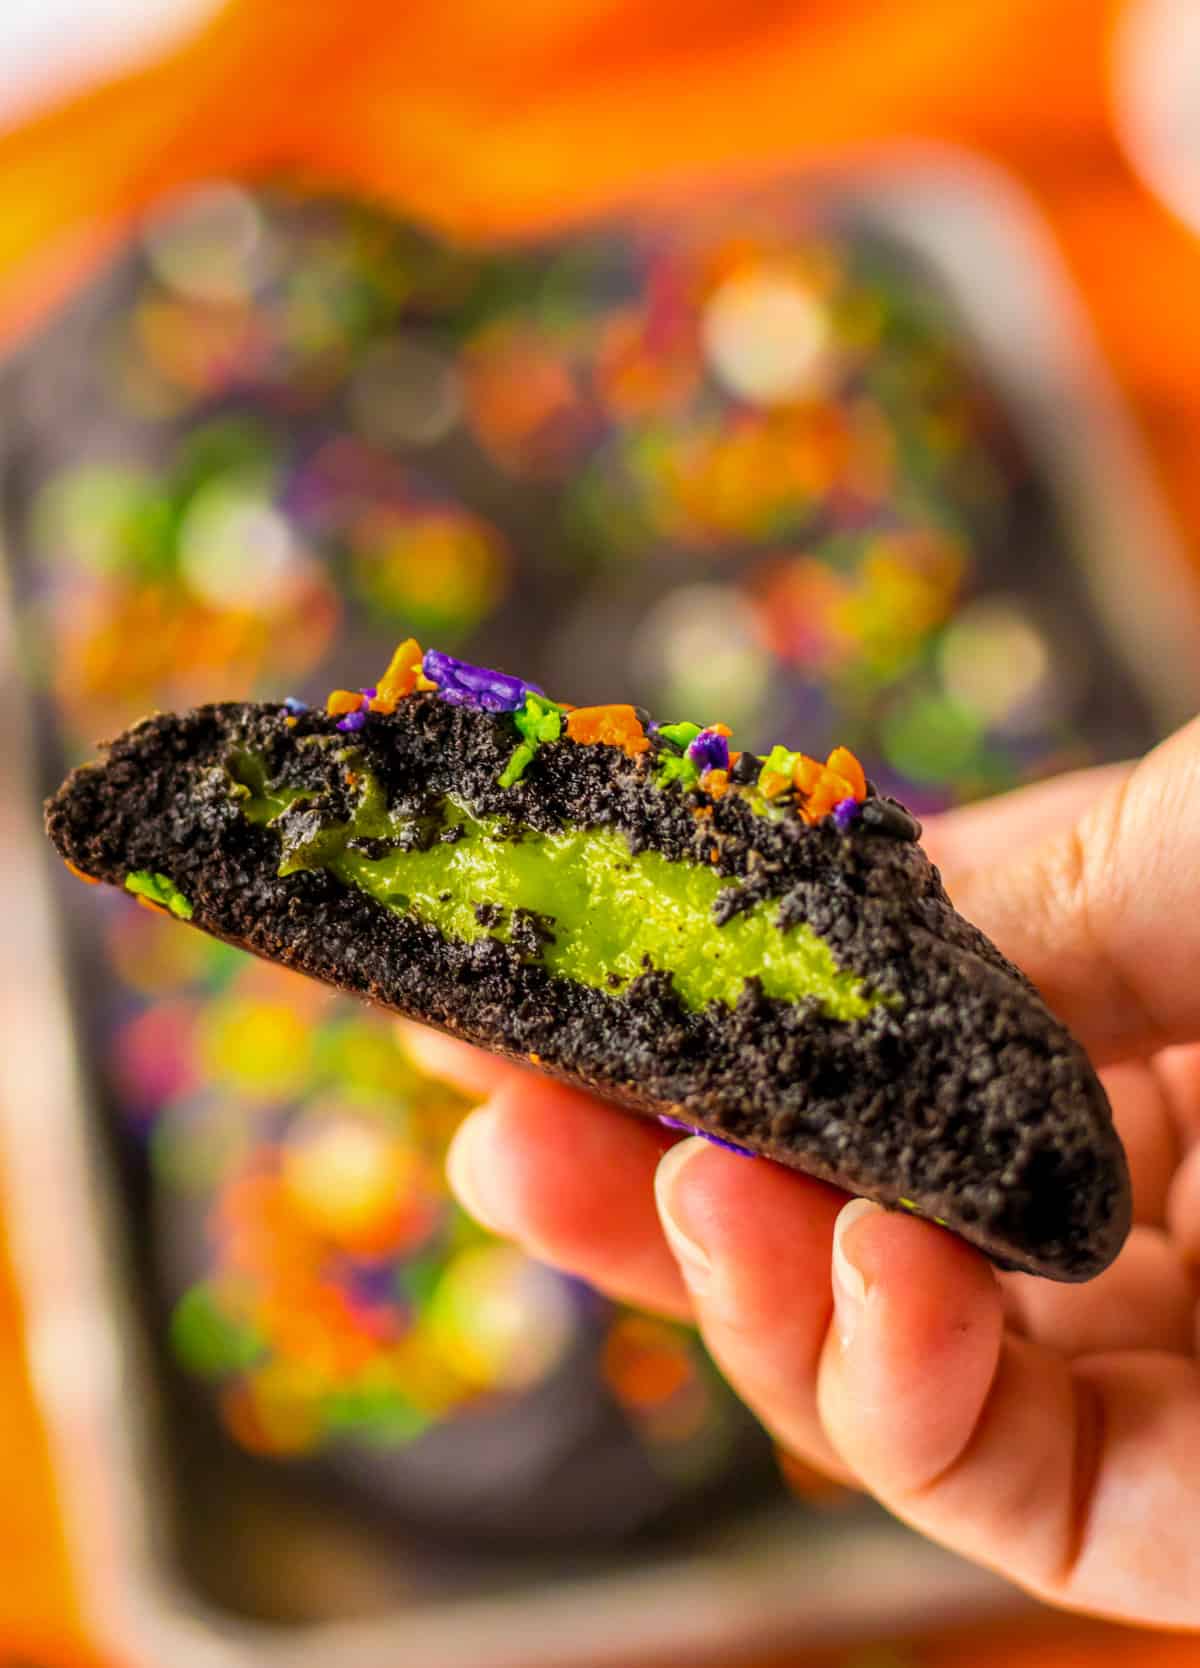 Hand holding a halloween cookie cut in half to show the neon green slime filling.